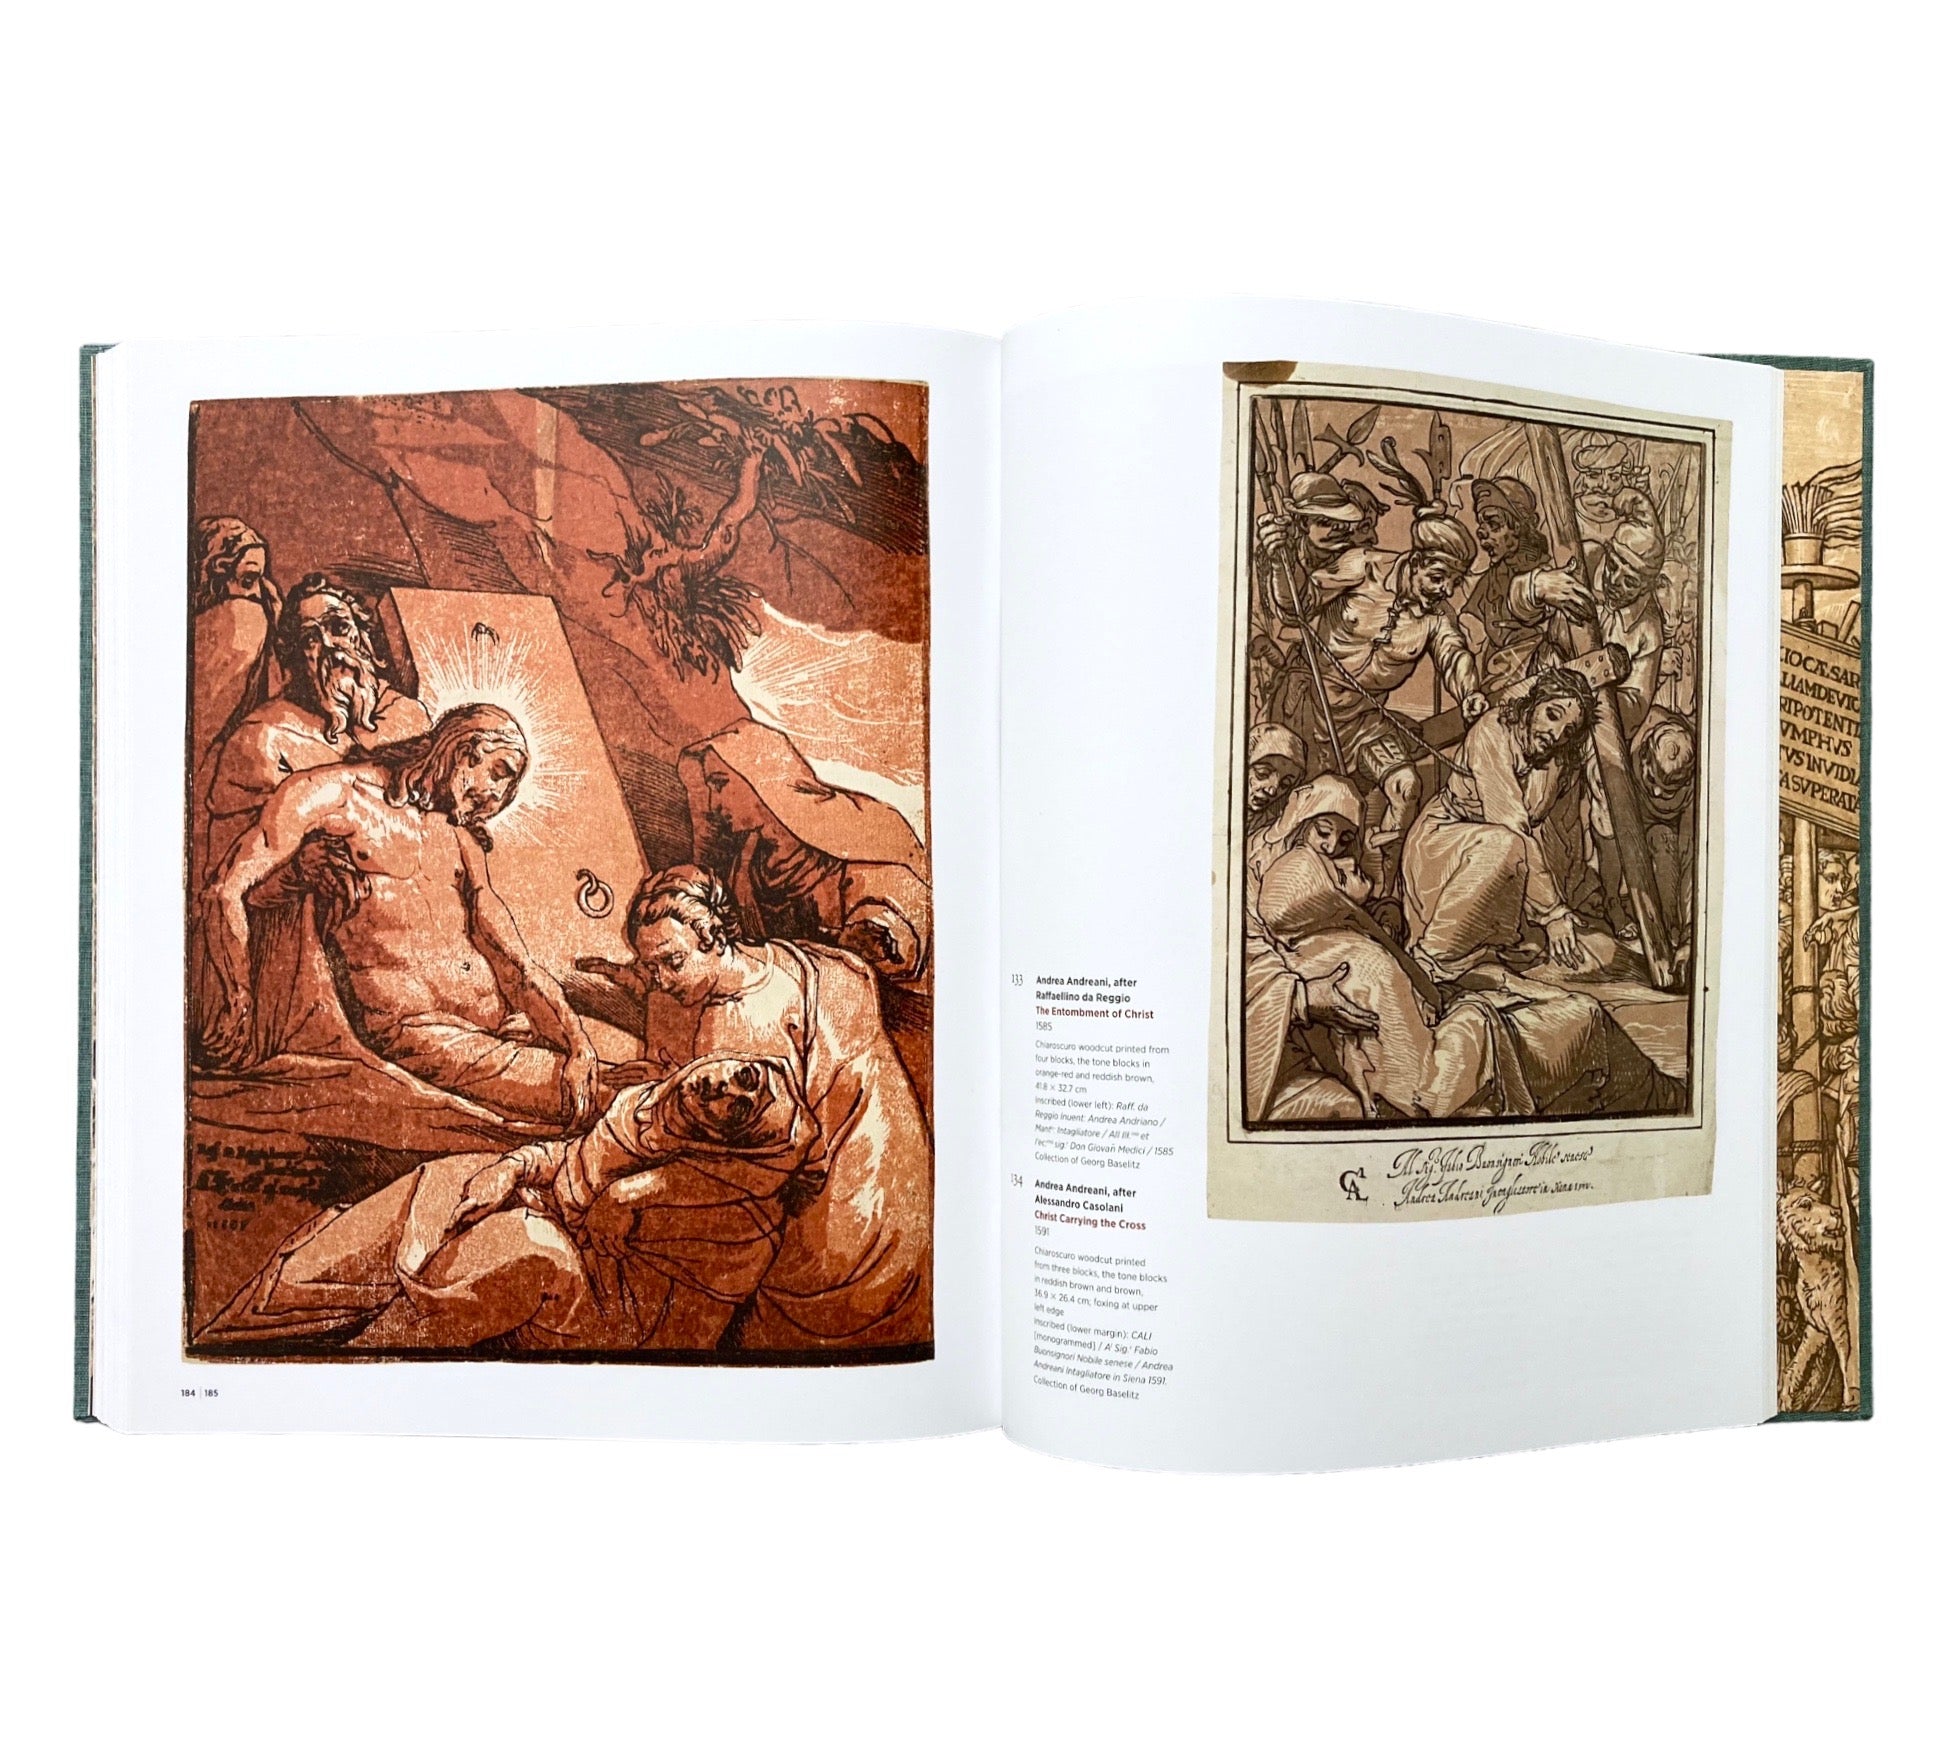 Chiaroscuro: Renaissance Woodcuts from the Collections of Georg Baselitz and The Albertina, Vienna